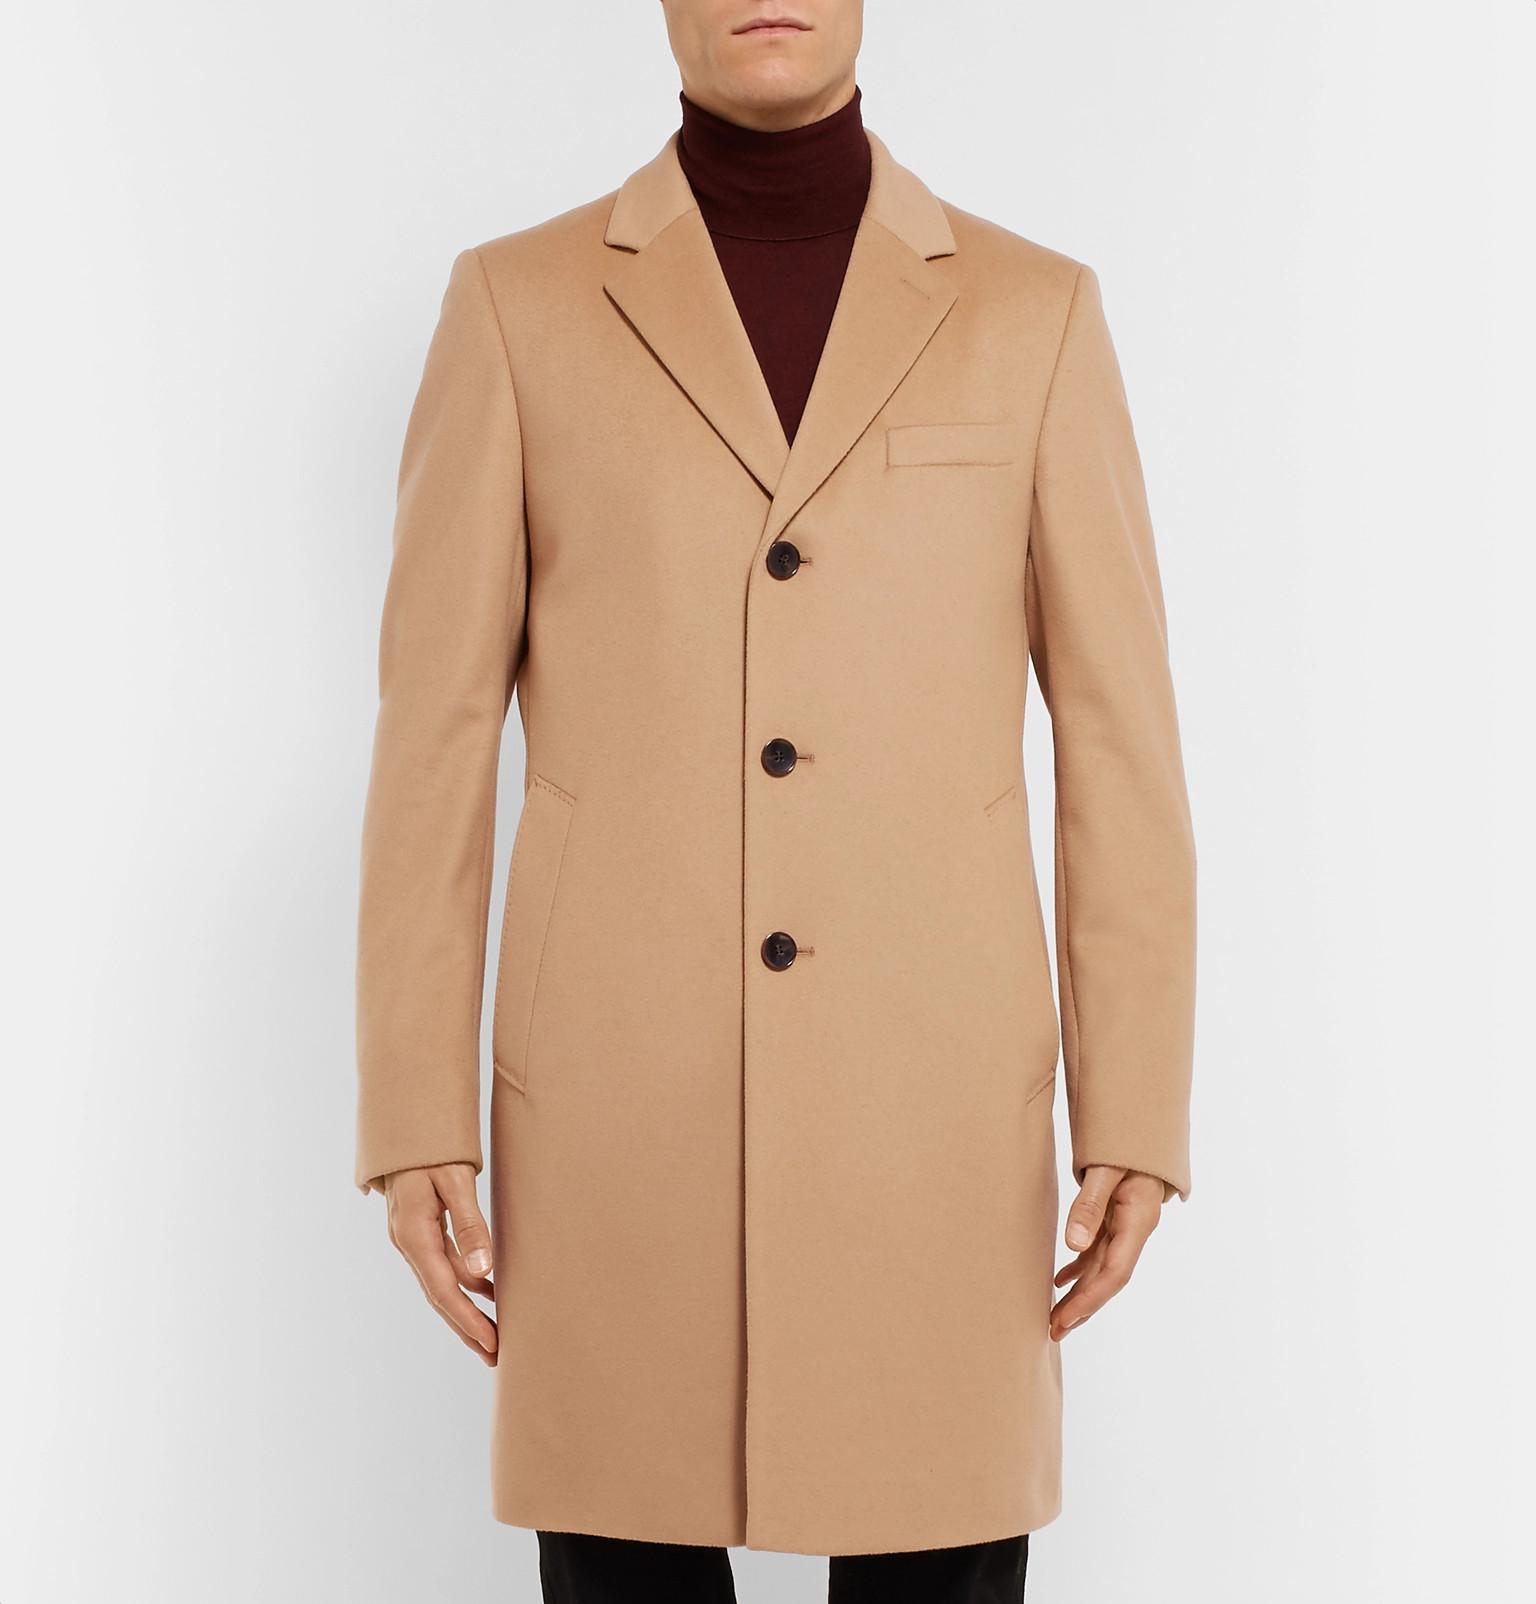 BOSS by HUGO BOSS Virgin Wool And Cashmere-blend Coat in Camel (Natural)  for Men - Lyst